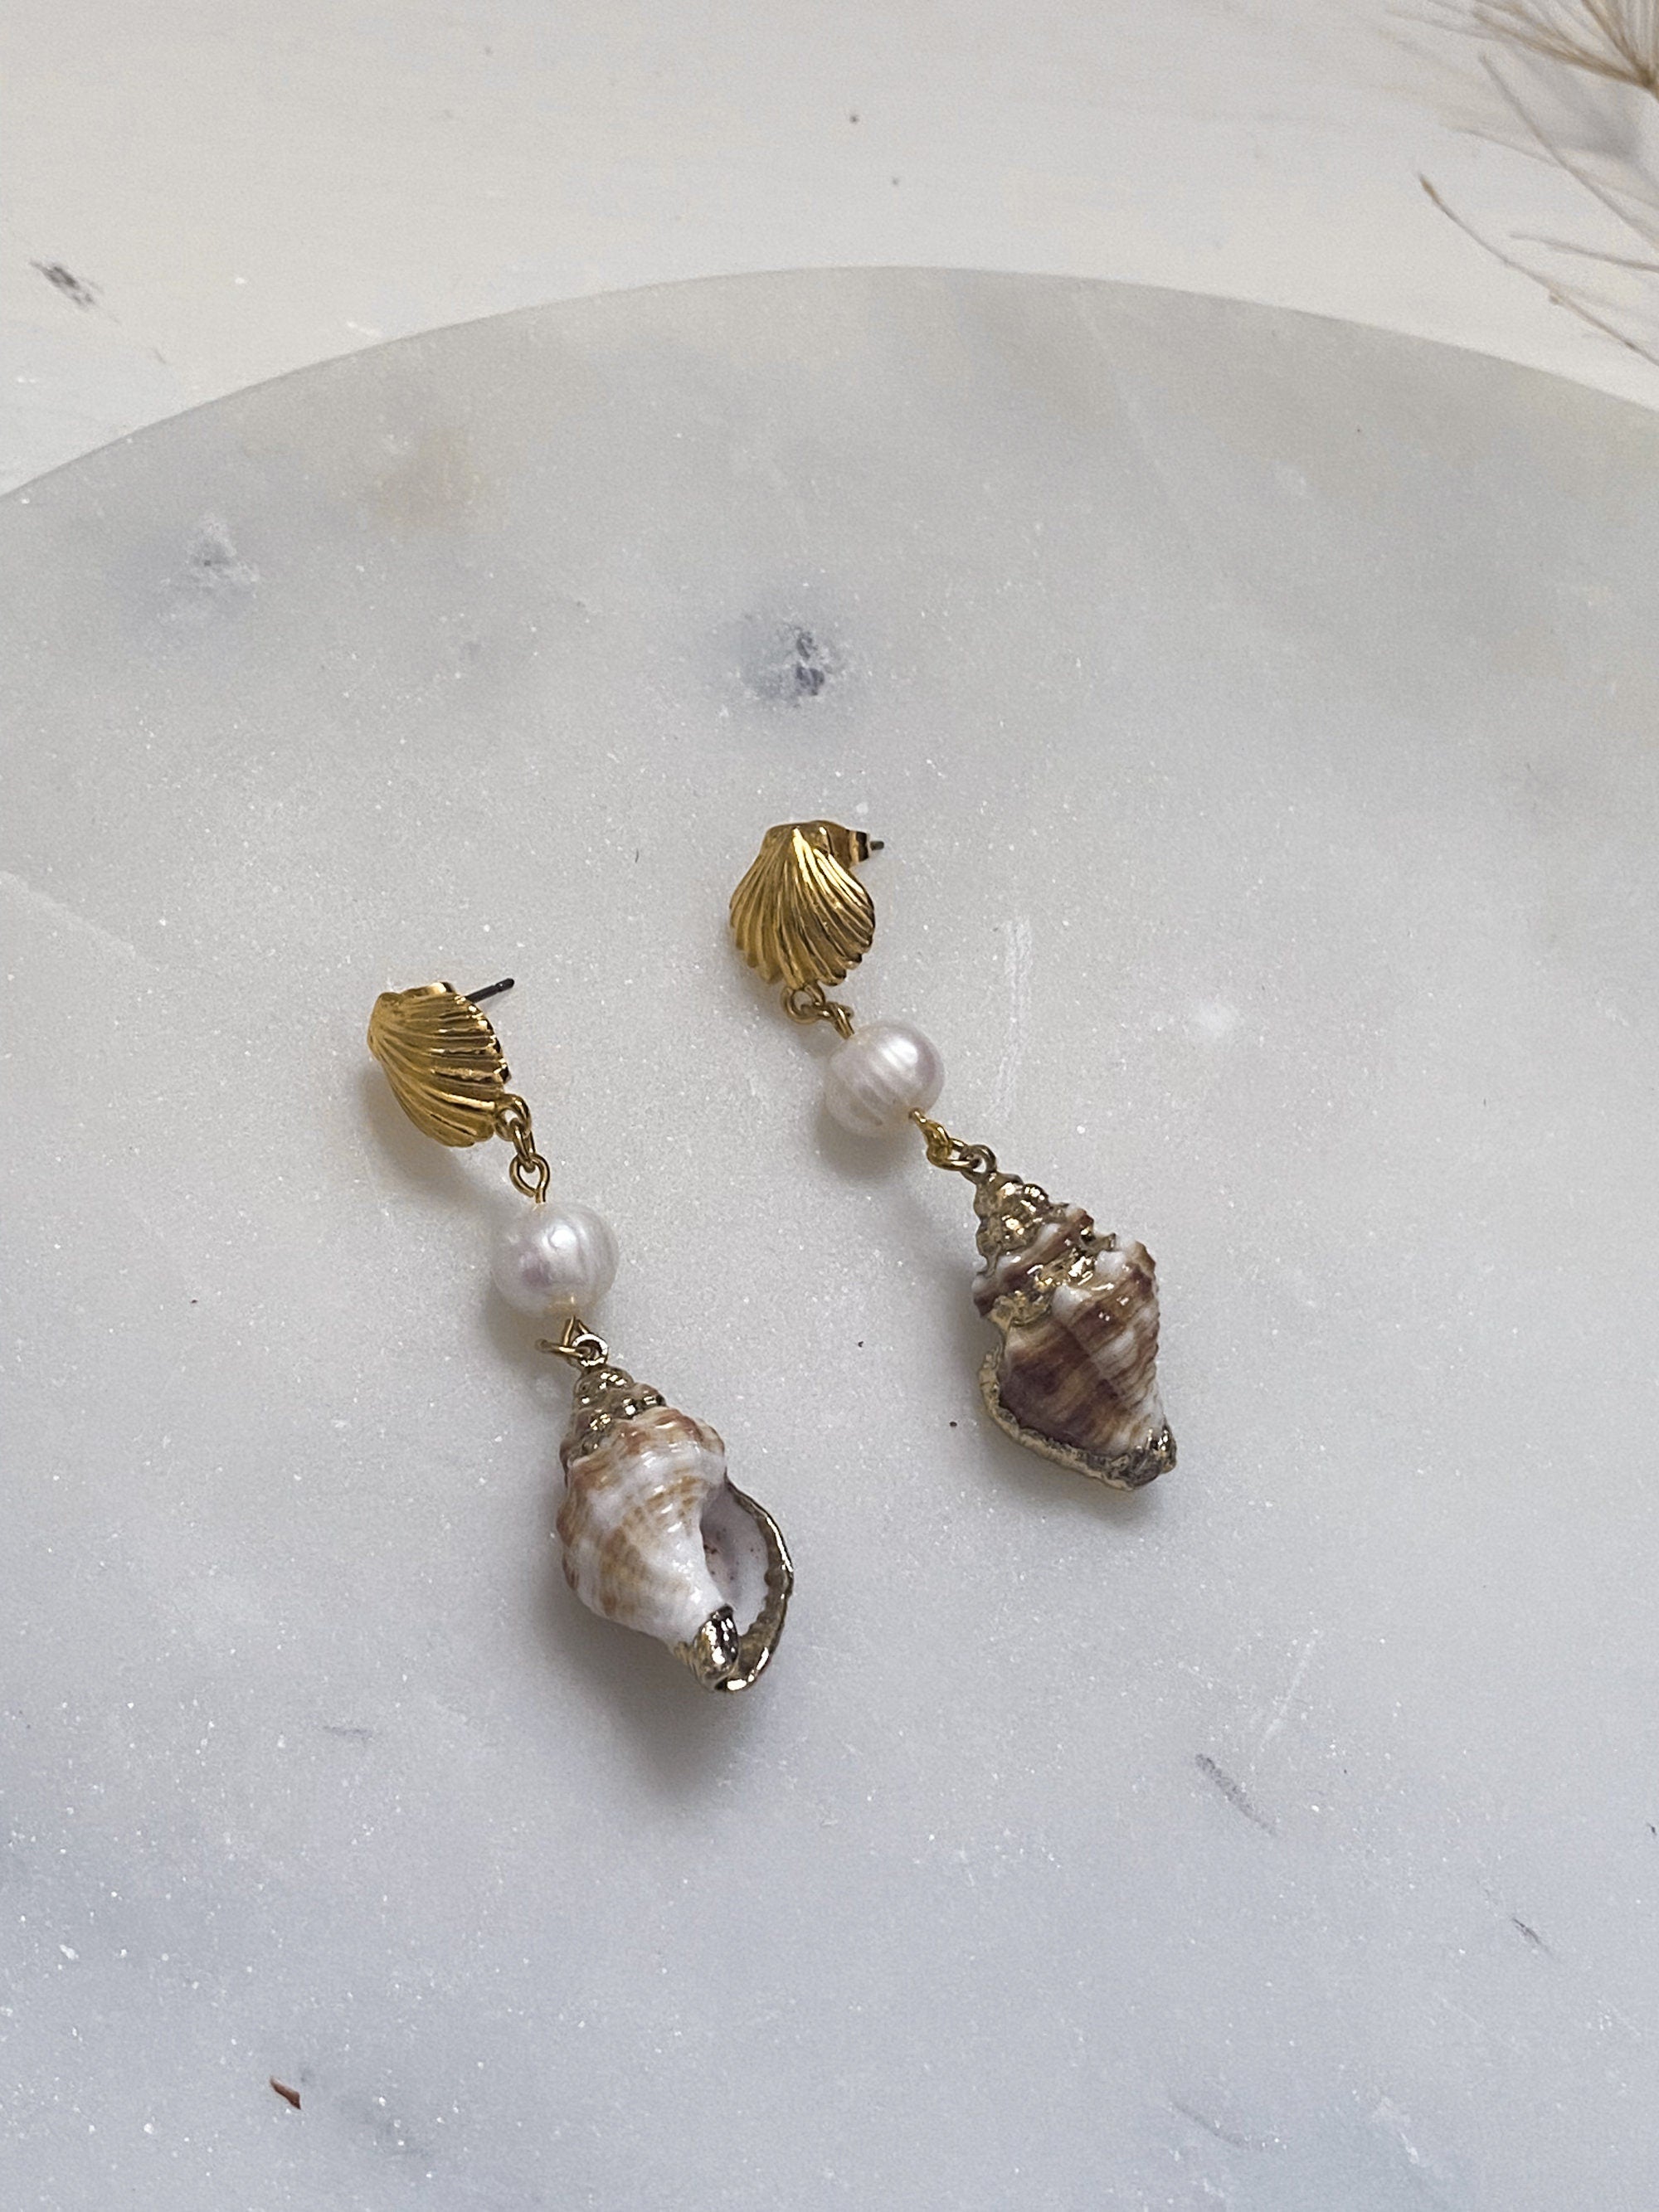 Pearl and natural shell earrings, Gold clam shell stud earrings, Siren core aesthetic jewelry, Summer little mermaids, Gift for her, MARINA